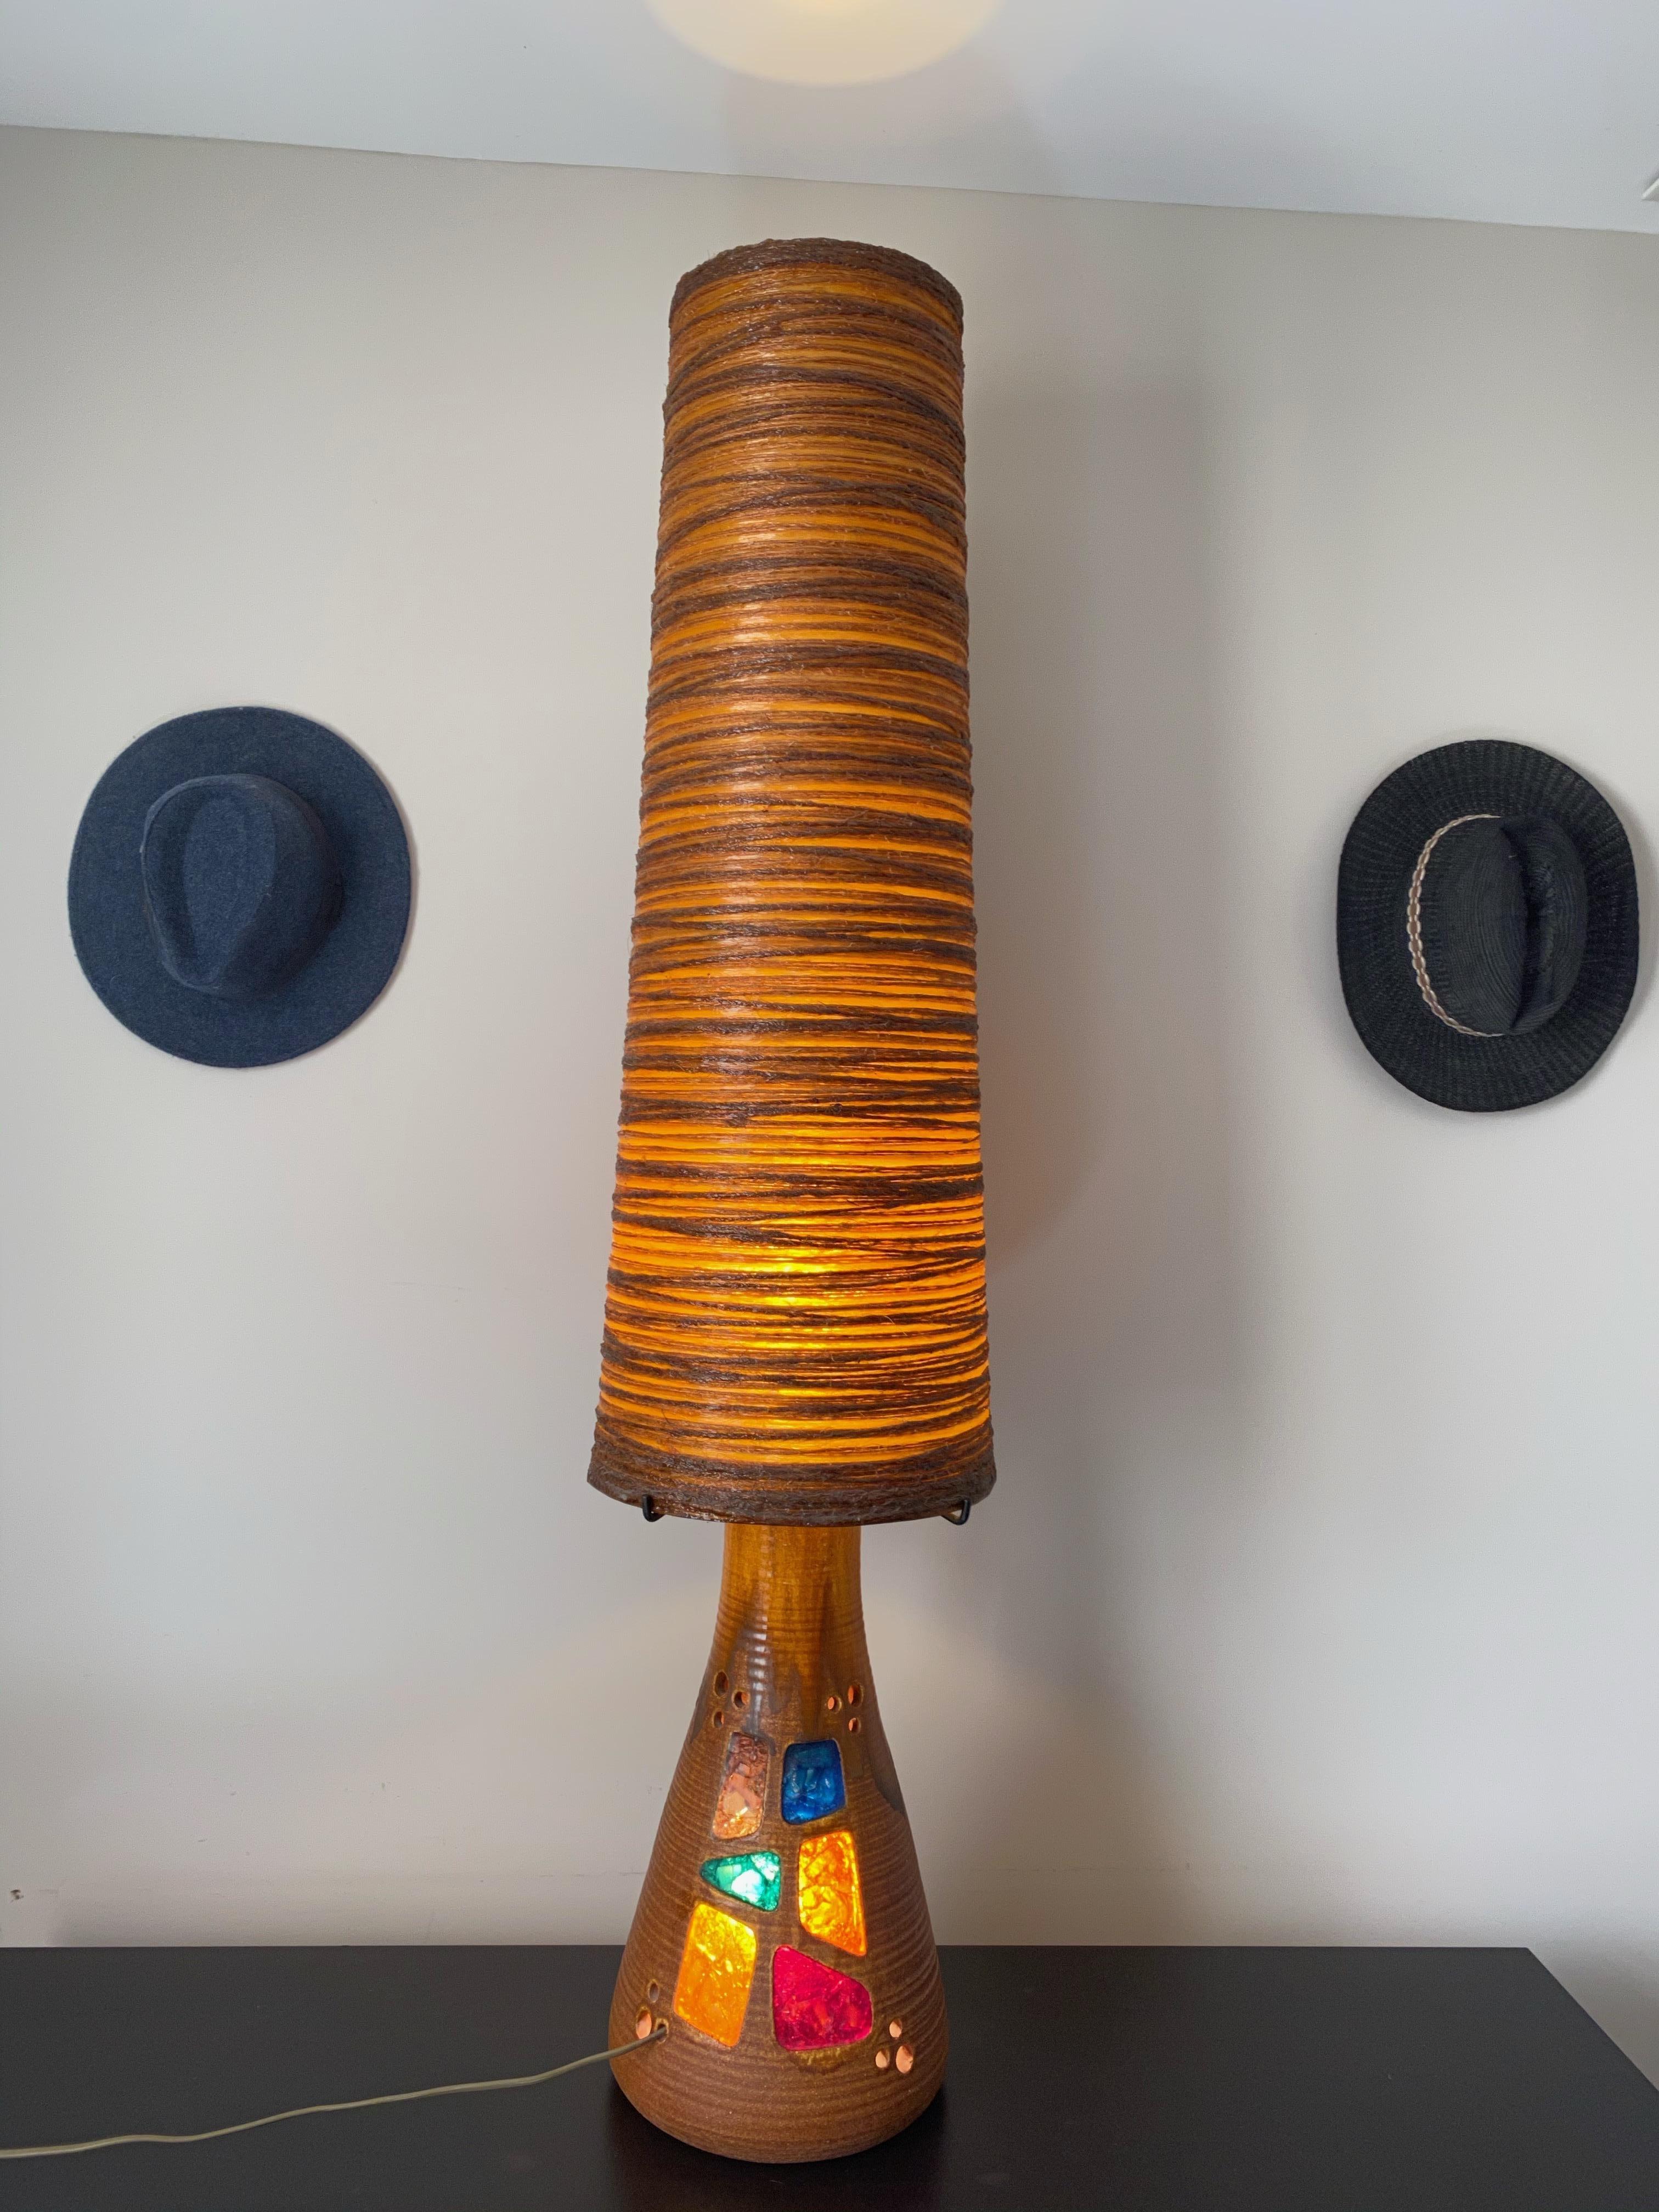 Important accolay lamp dans le style de georges pelletier in vintage 1970 ceramic. Resin lampshade, colored resin cabochon in the base. The lamp has double lighting. Very good condition.

Georges Pelletier was born in Brussels on 10.09.1938.
He